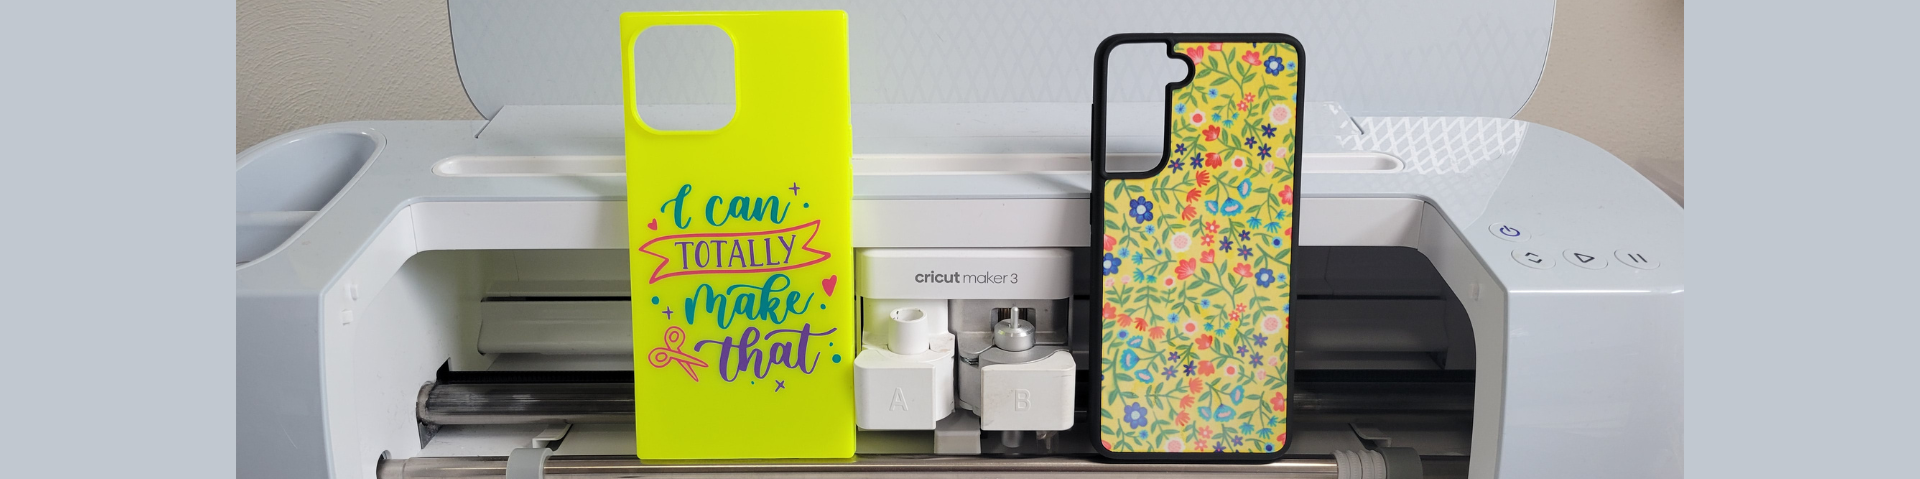 How to Personalize a Phone Case with 2 Different Ways // Infusible Ink and Cricut Vinyl Tutorials